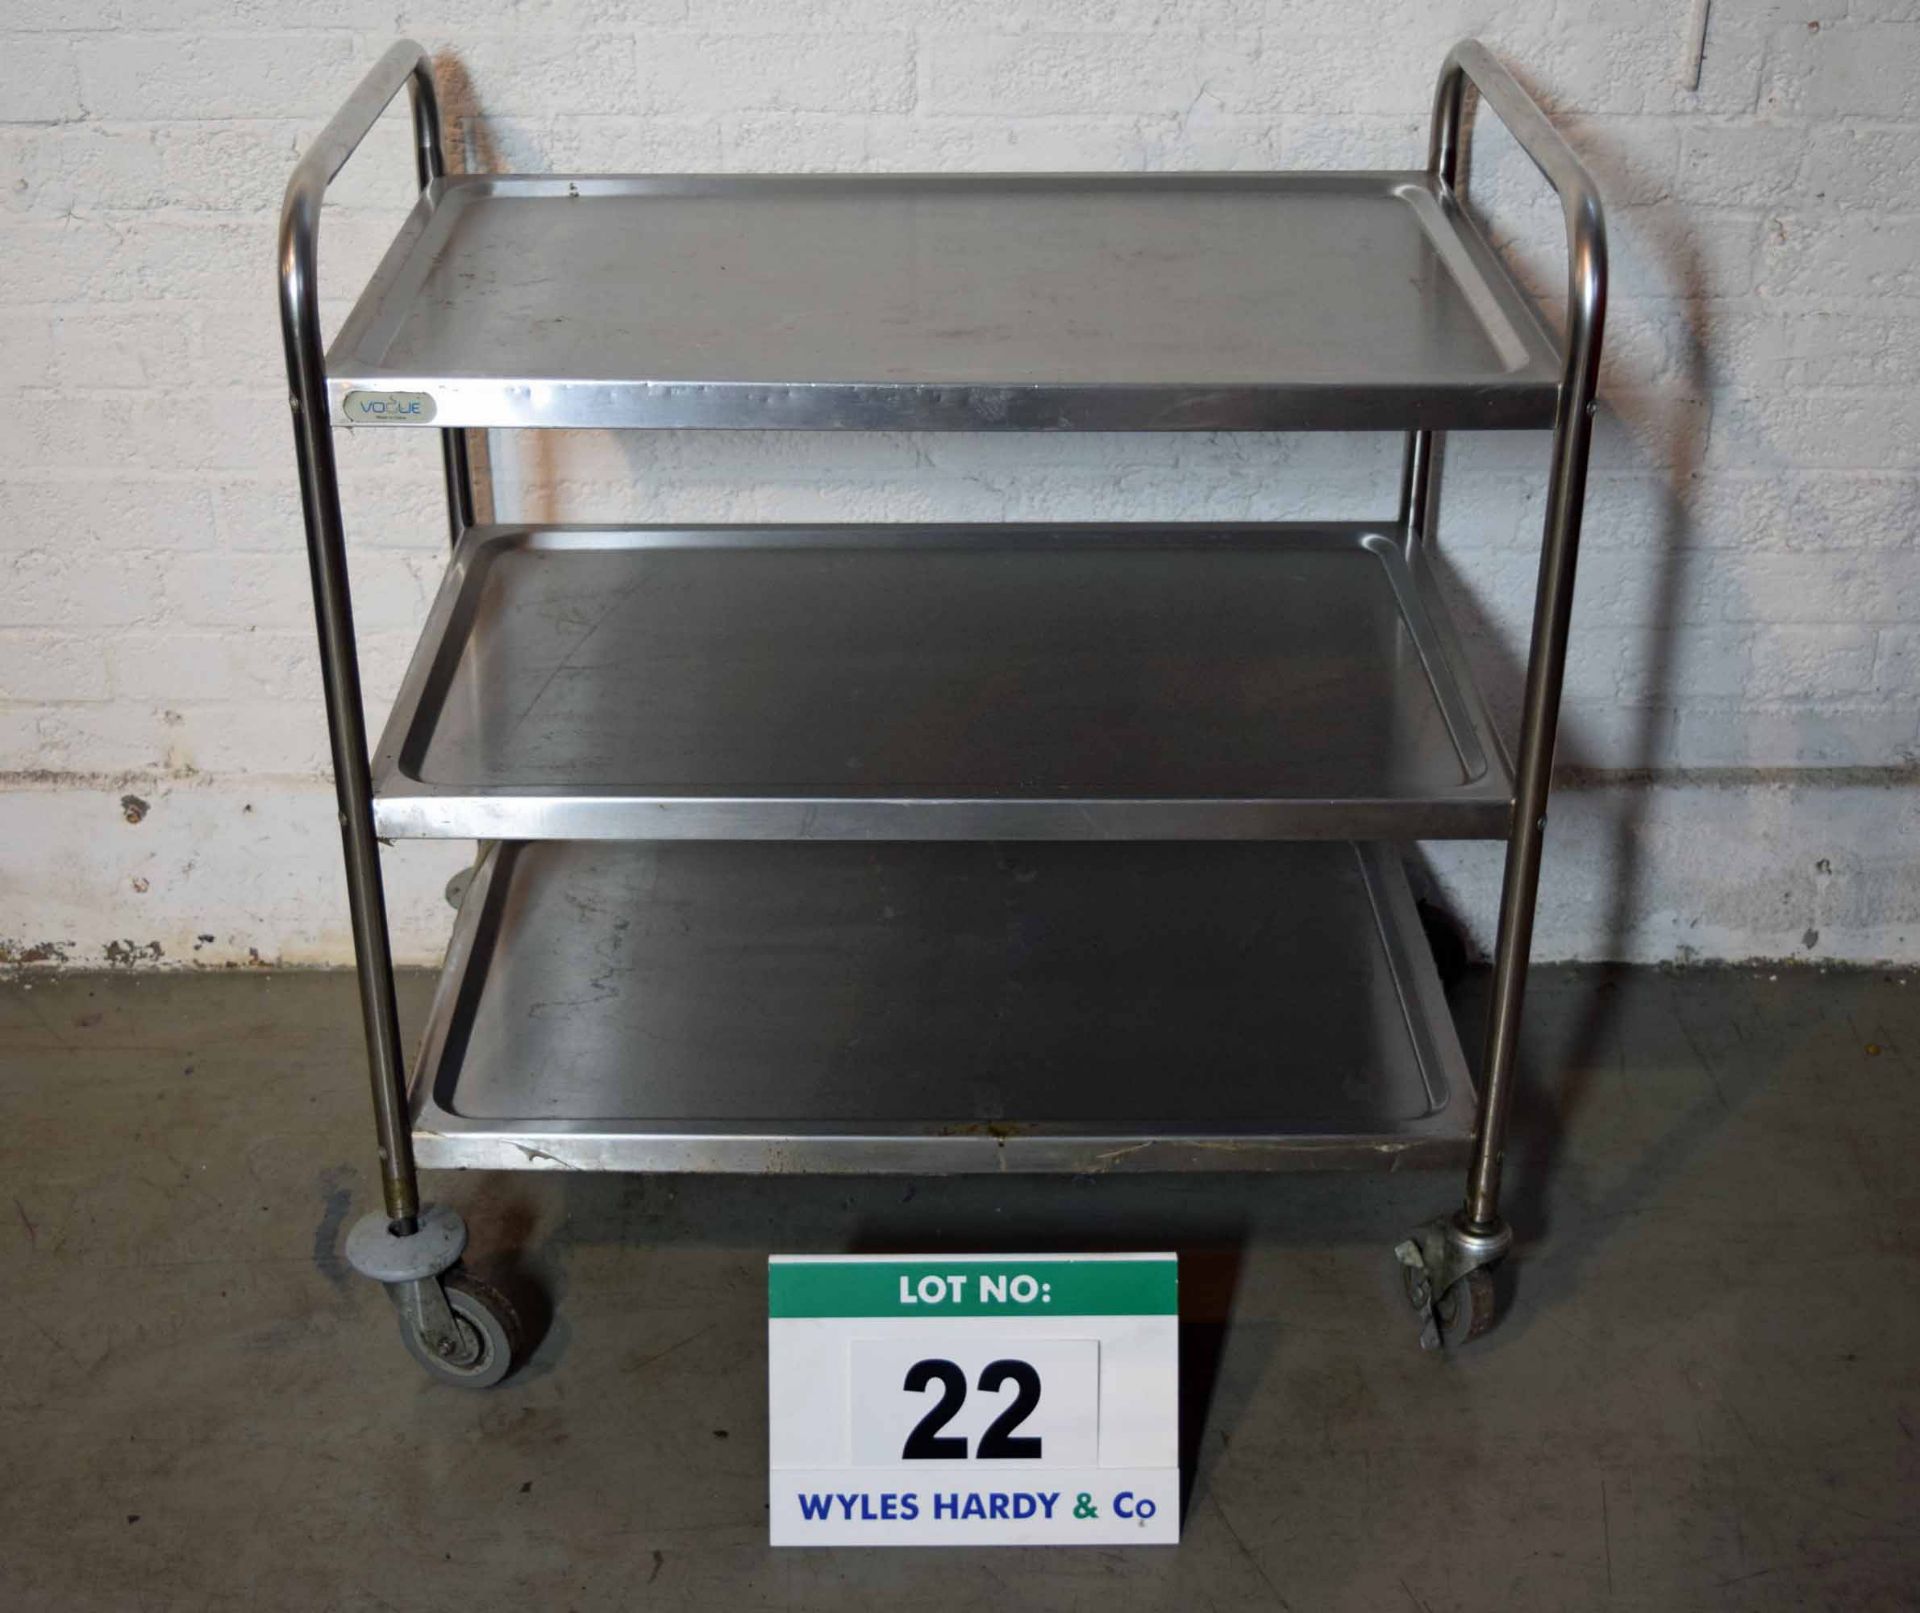 A 3-Tier Stainless Steel Kitchen Trolley